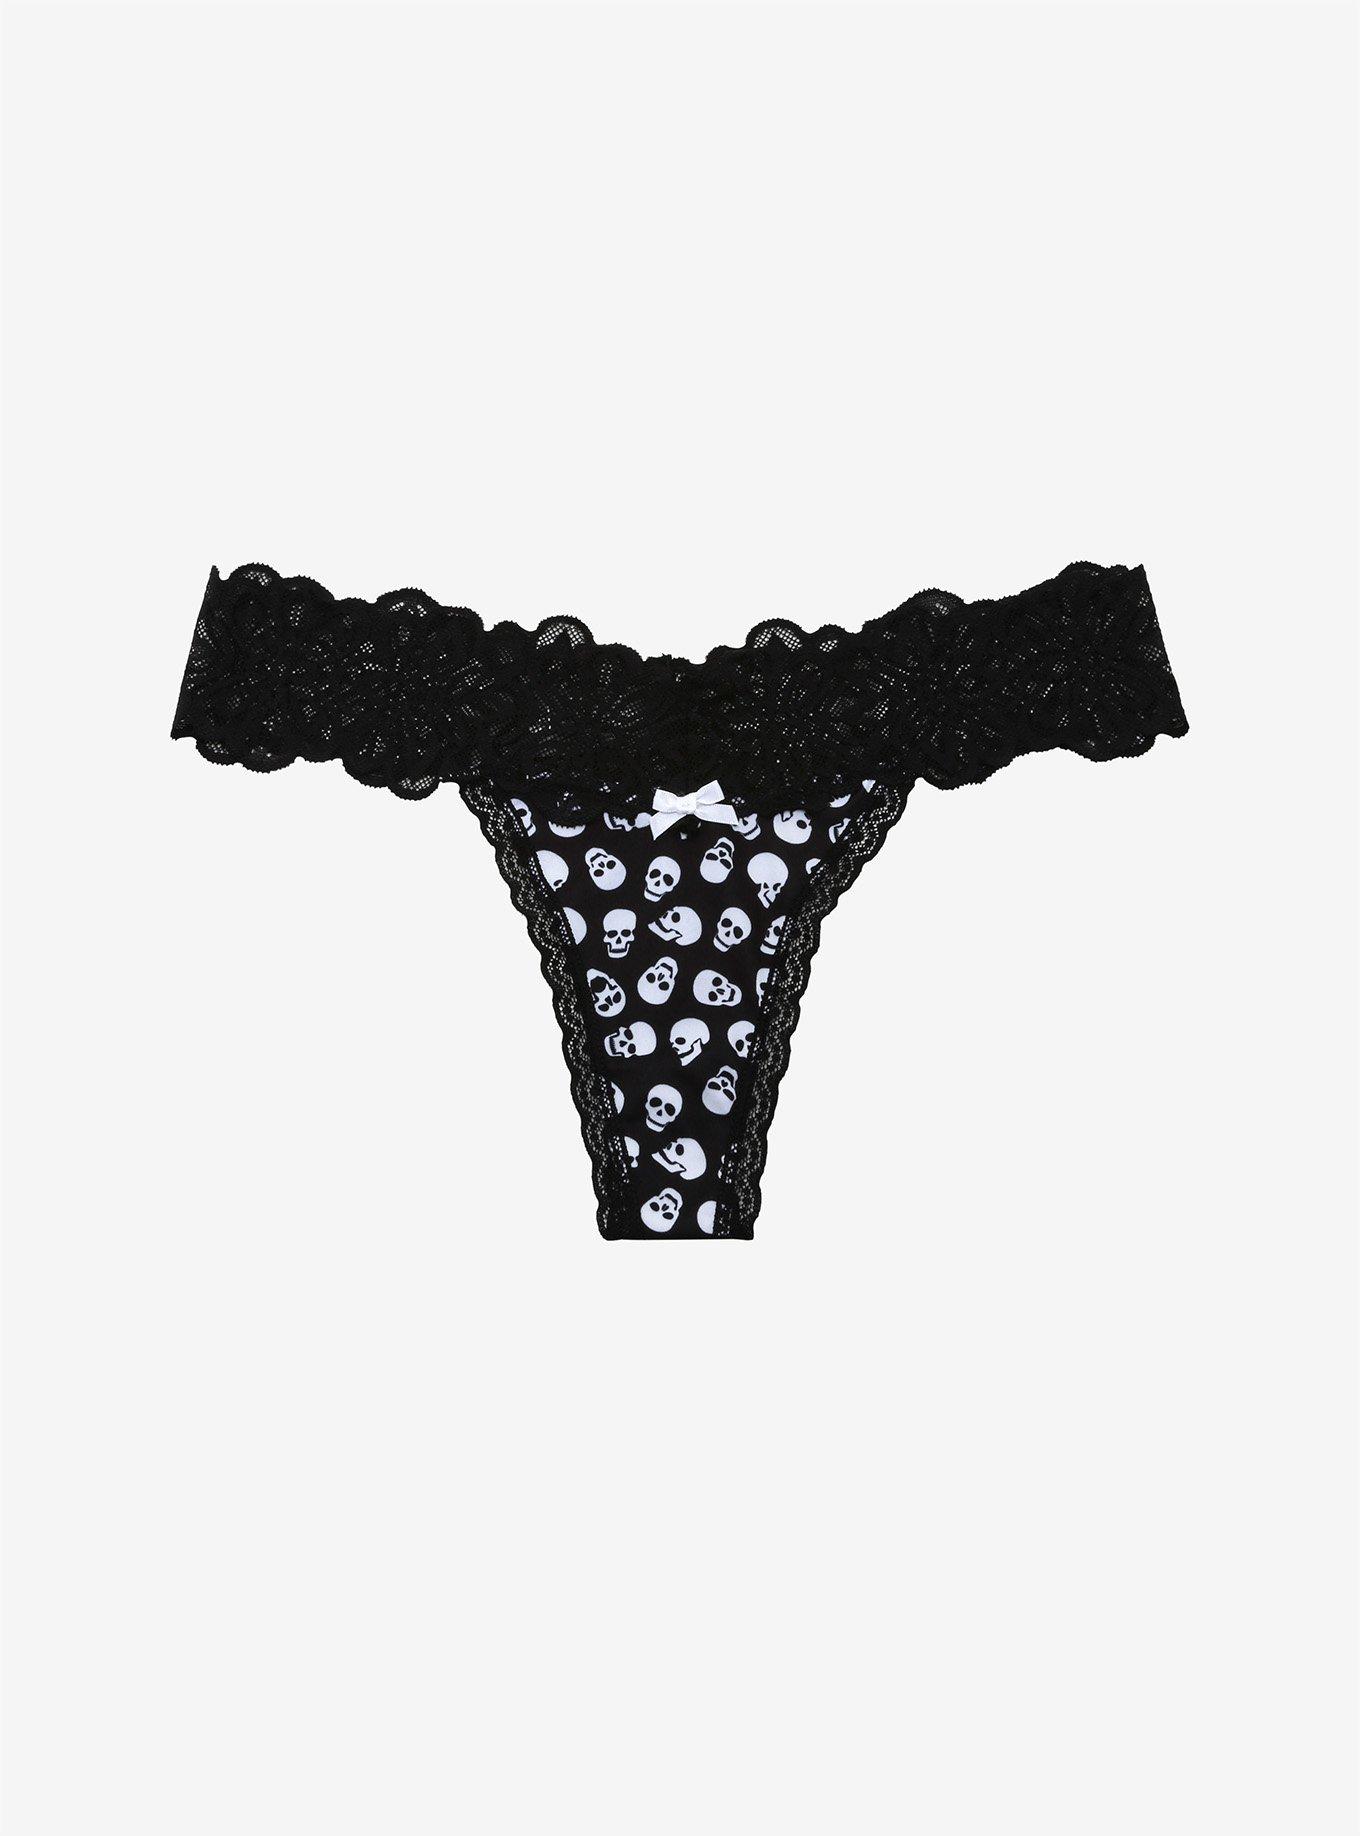 Buy SS Queen Women Sexy Lingerie Pendant Panties Lace G-String